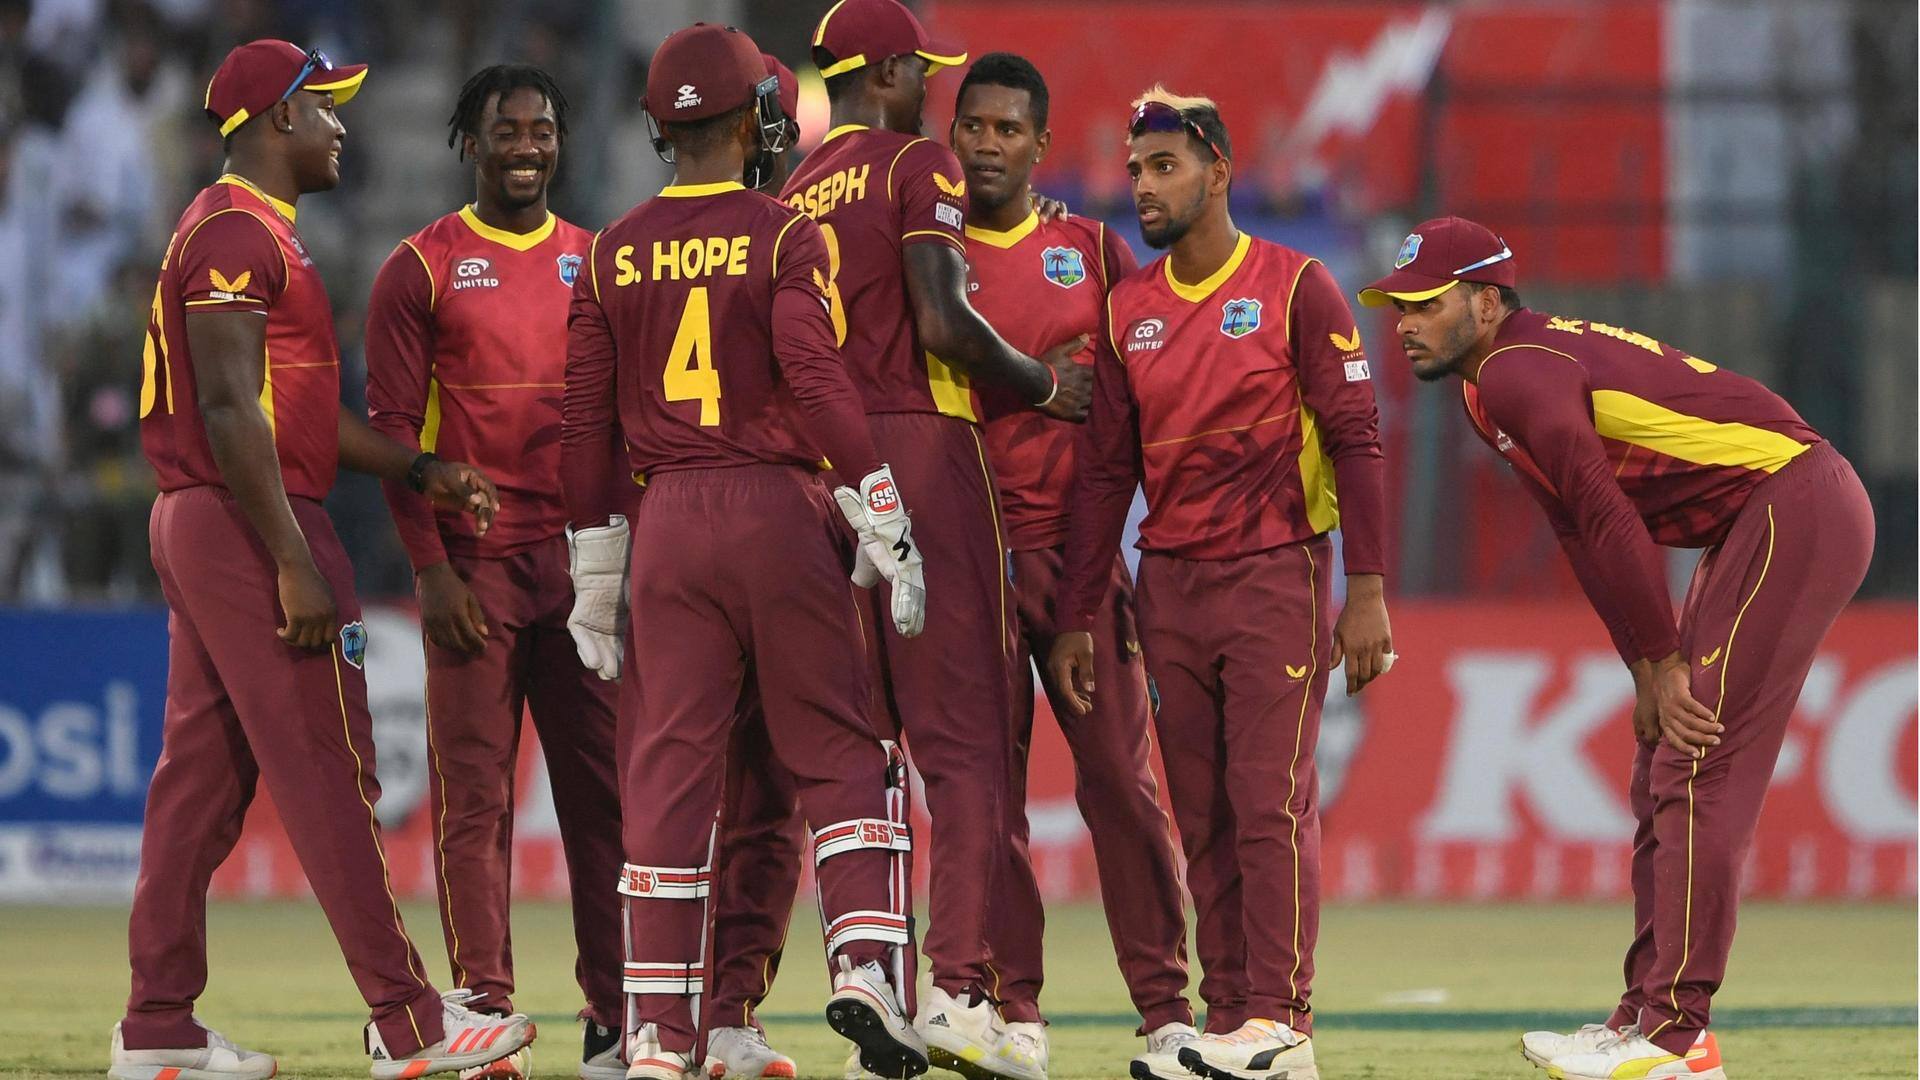 UAE vs West Indies ODIs: Here is the statistical preview